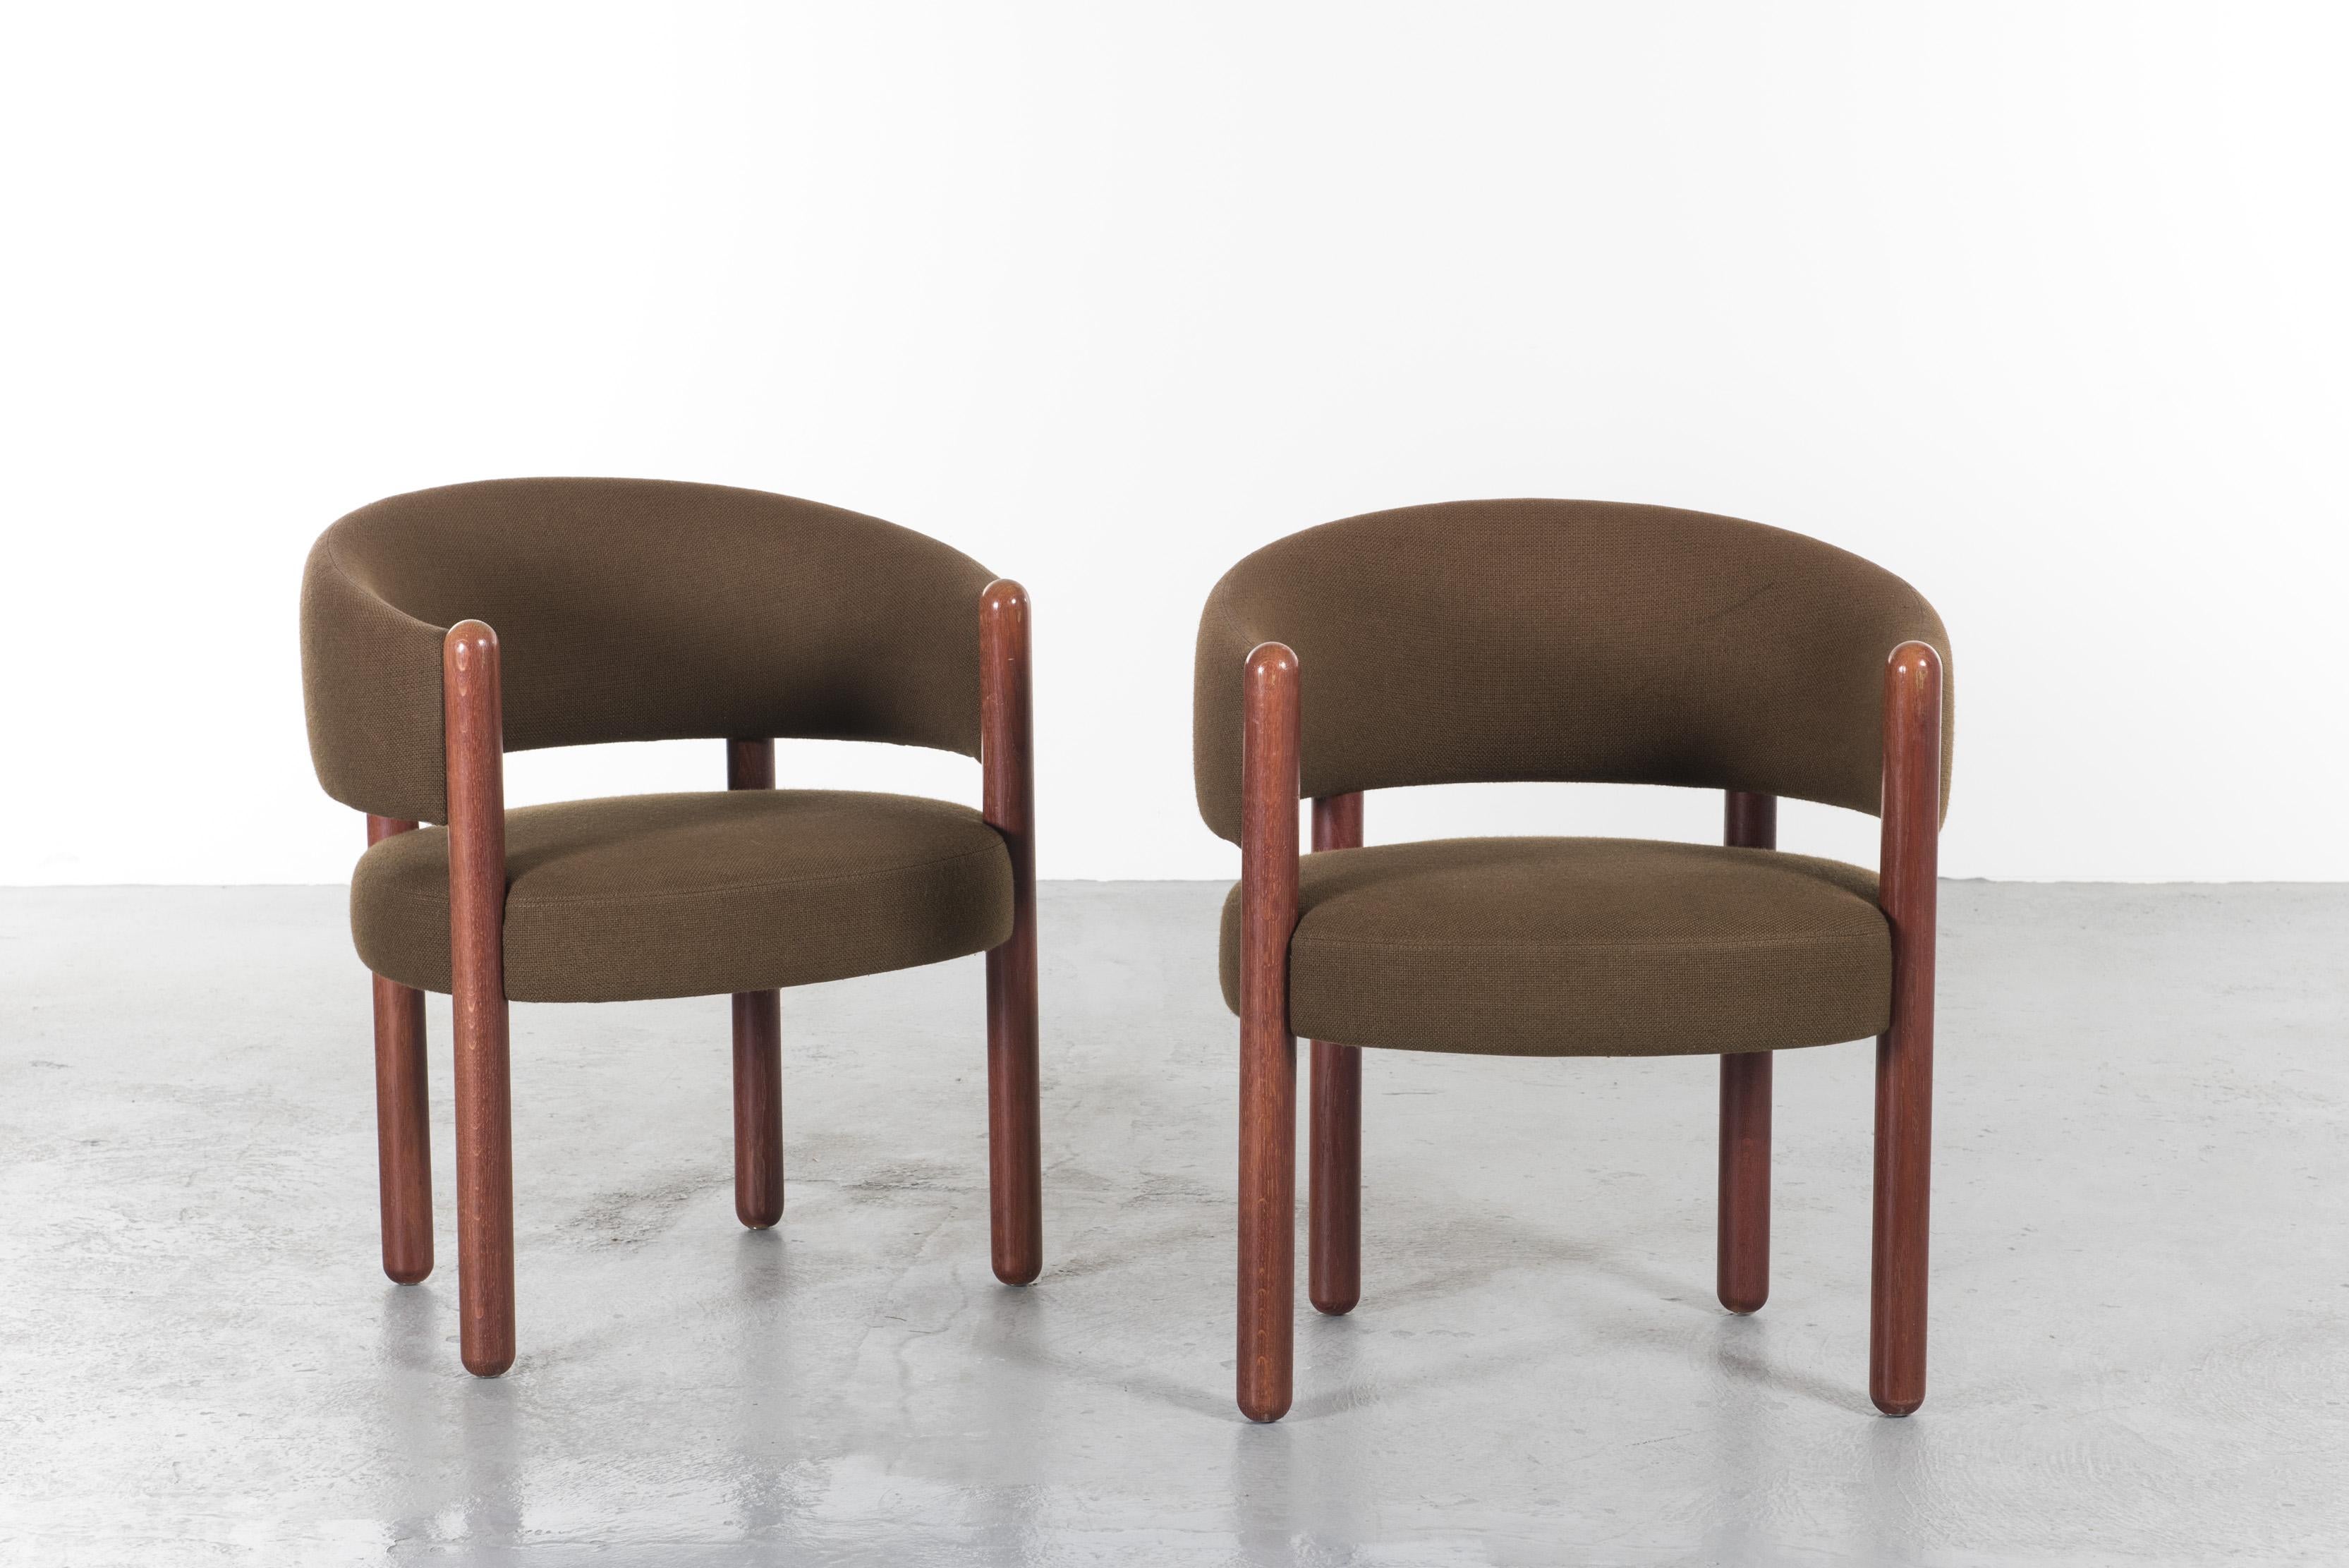 Pair of visitors chairs by The famous Swiss designers couple.
The visitor chairs are made of four logs feets in wood and with padded back and seat, brown whool fabric covered by Kvadrat.